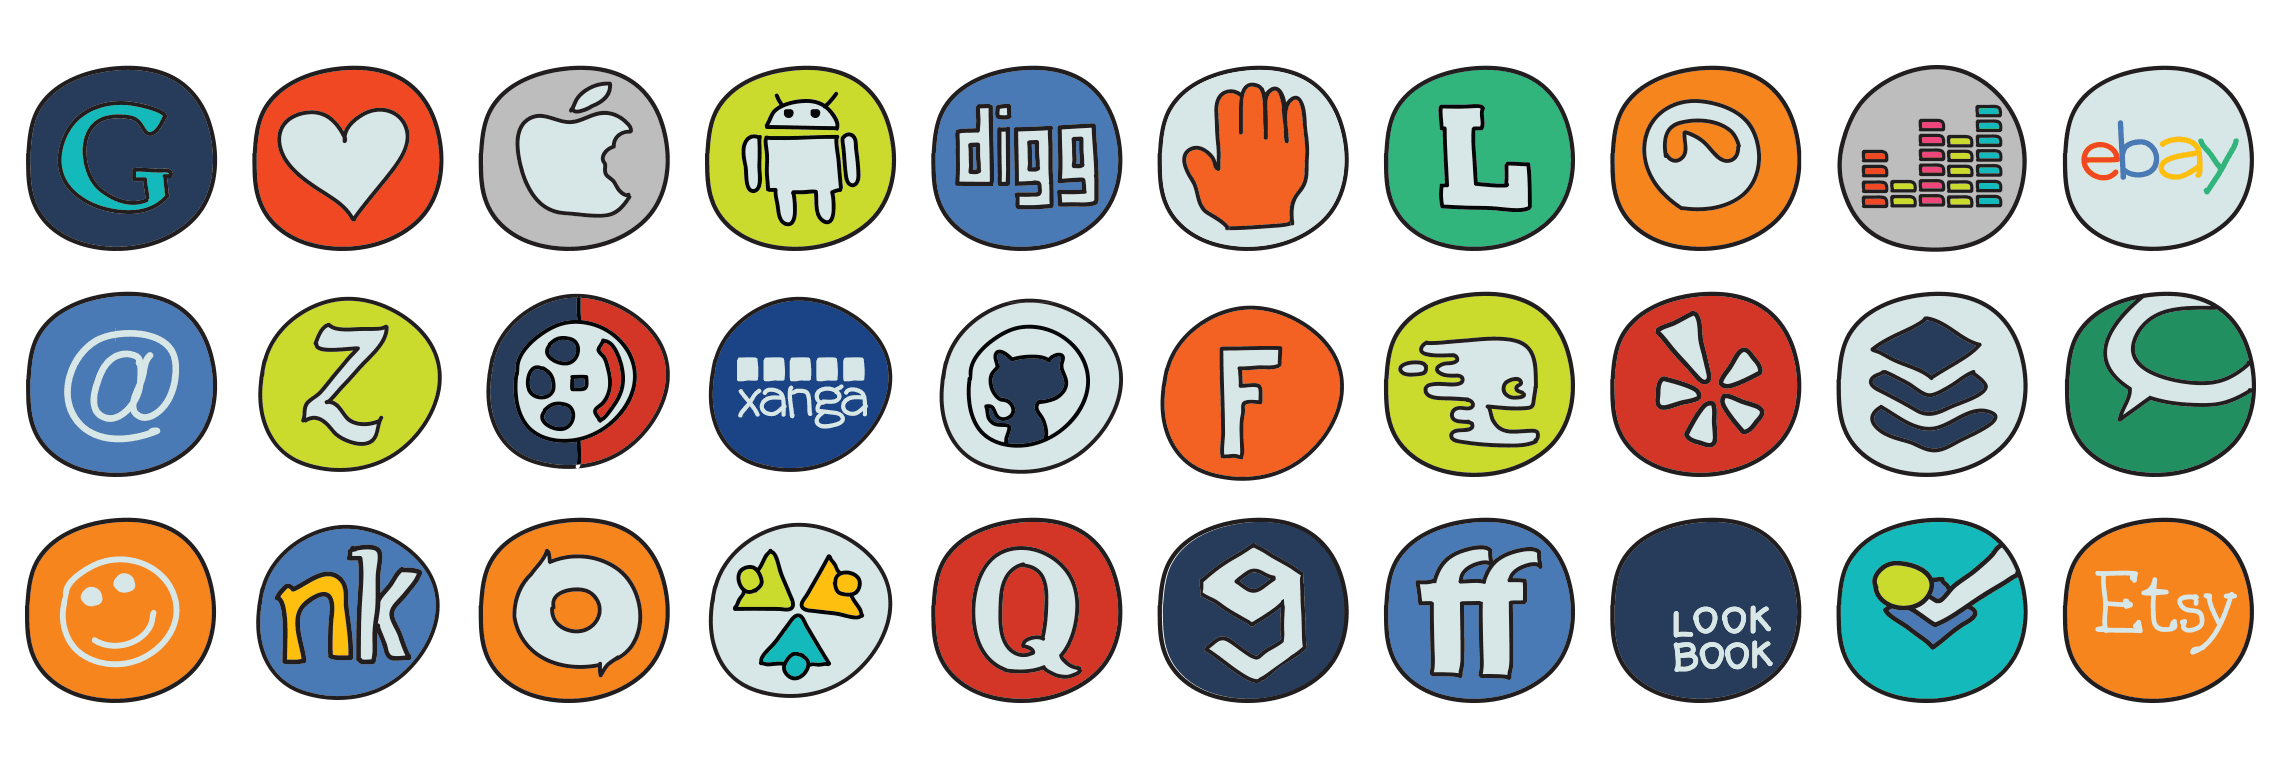 Social-Media-doodle-icons-2